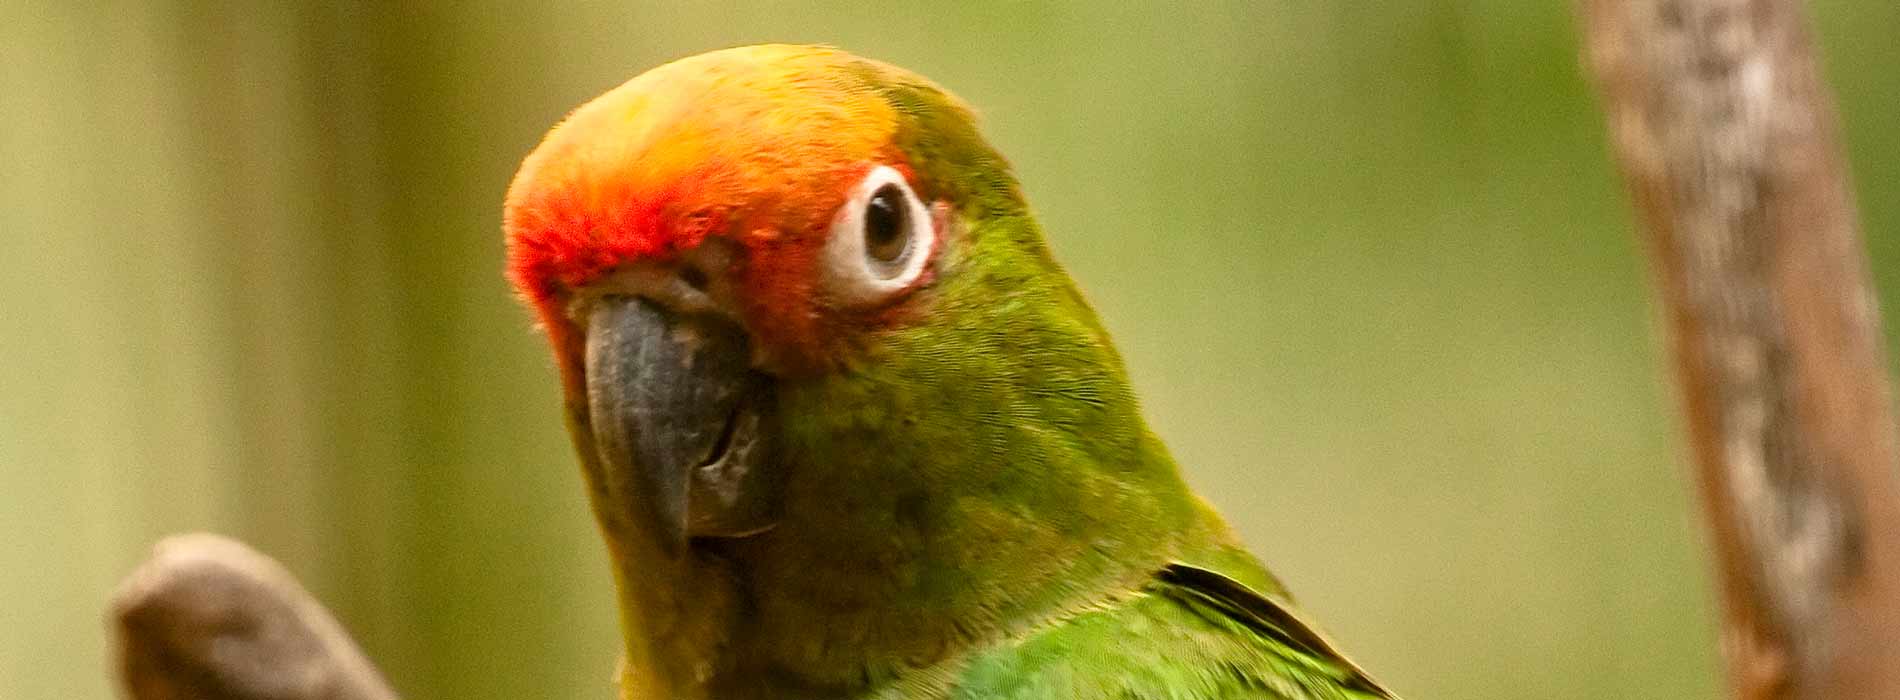 Golden capped conure